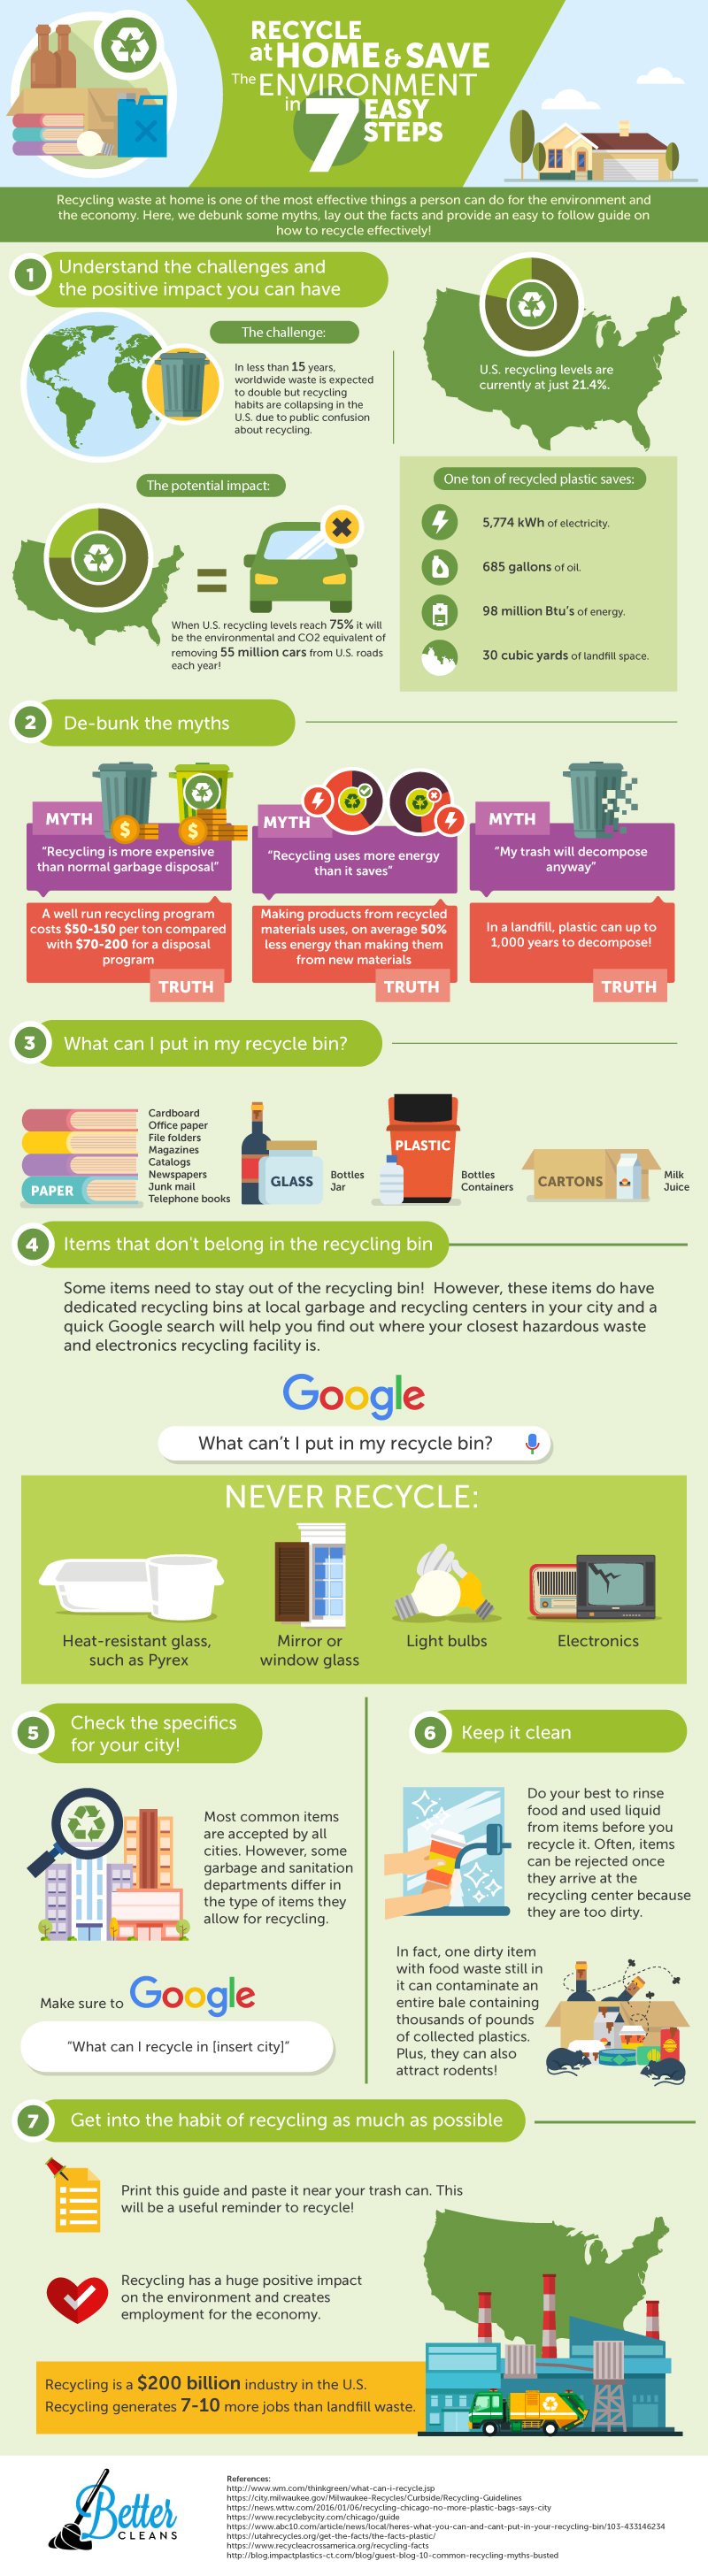 Recycling Infographic